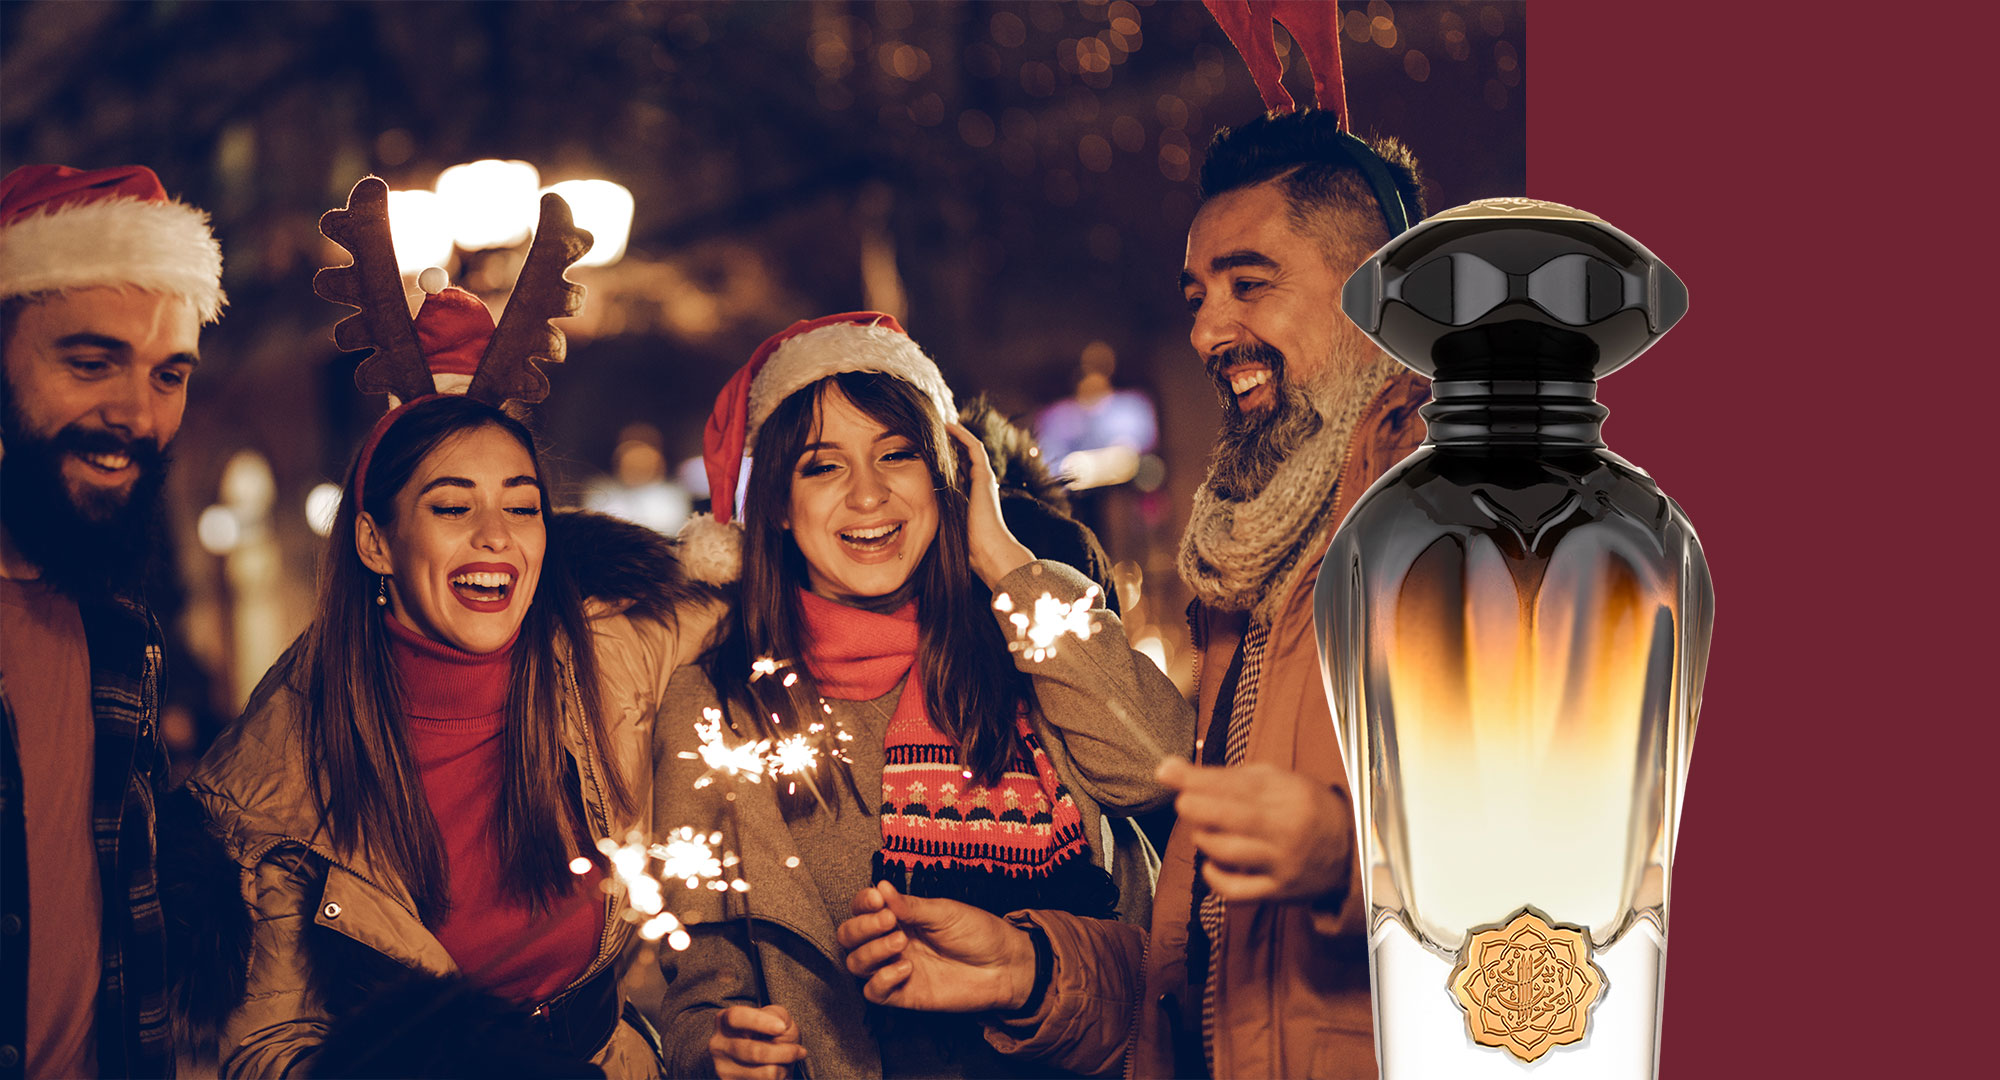 Celebrate the Holidays with the Festive Warmth of Spicy Scent Perfumes